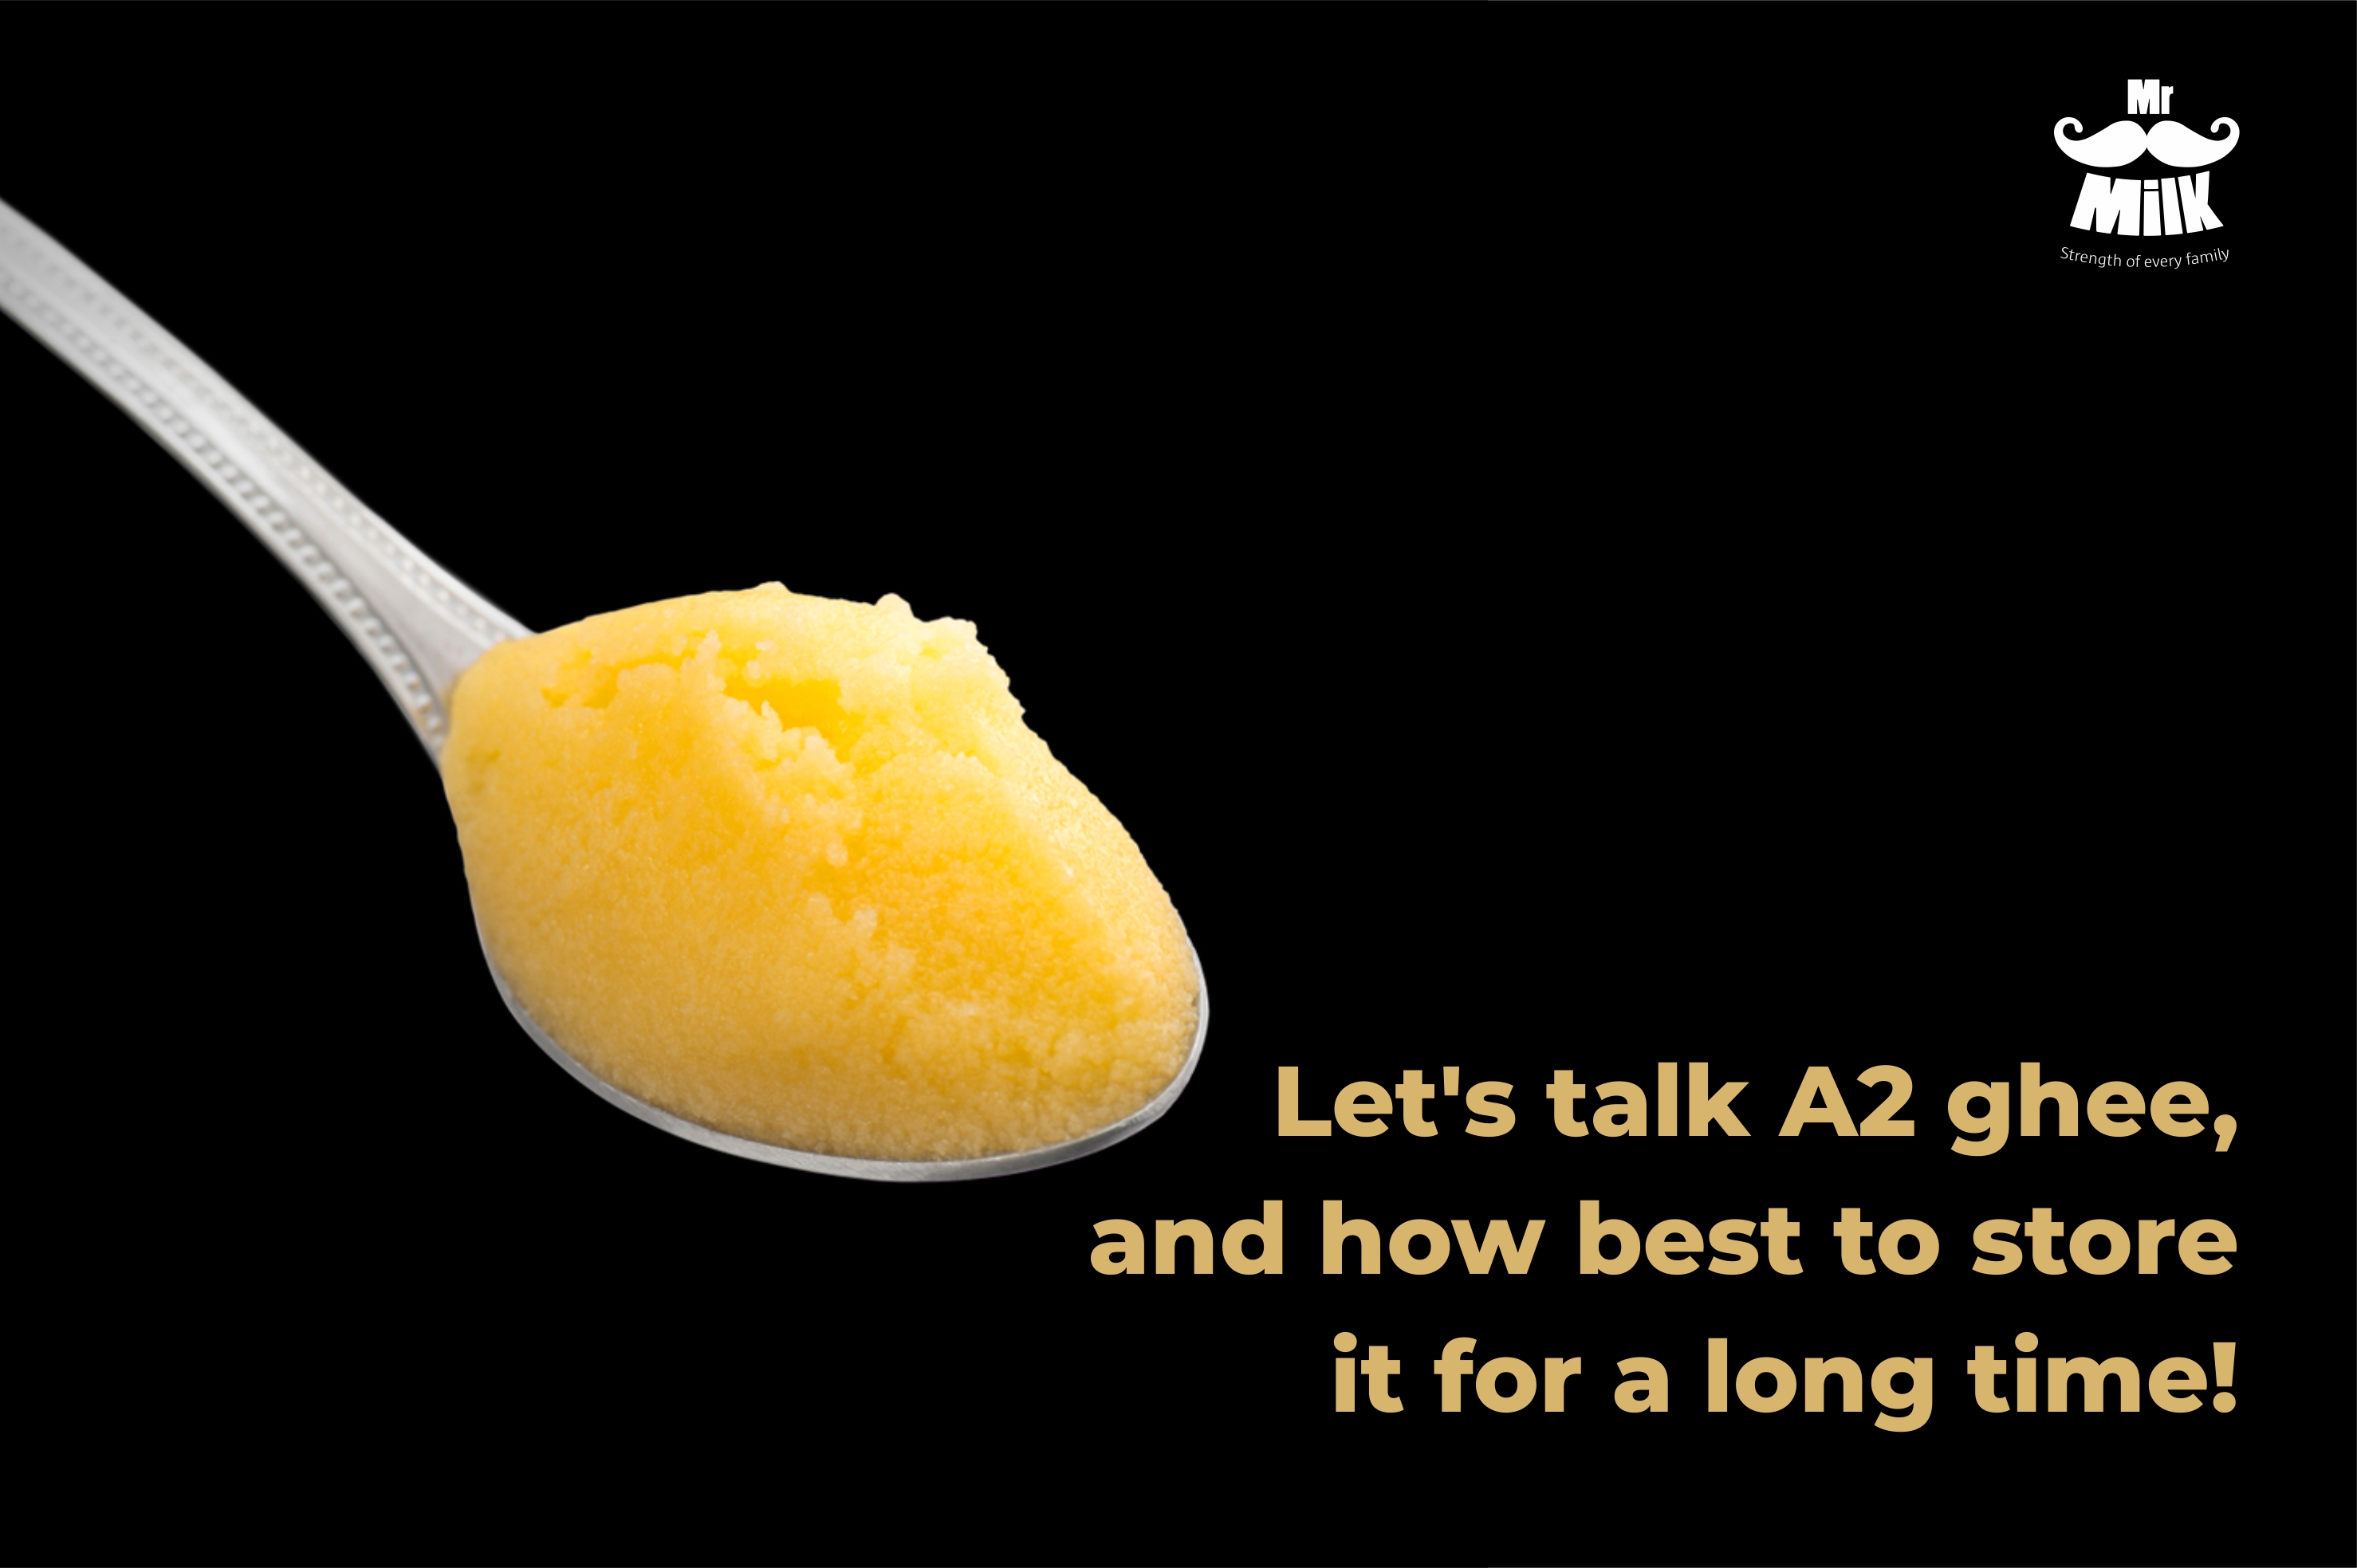 Let’s talk A2 ghee, and how best to store it for a long time!